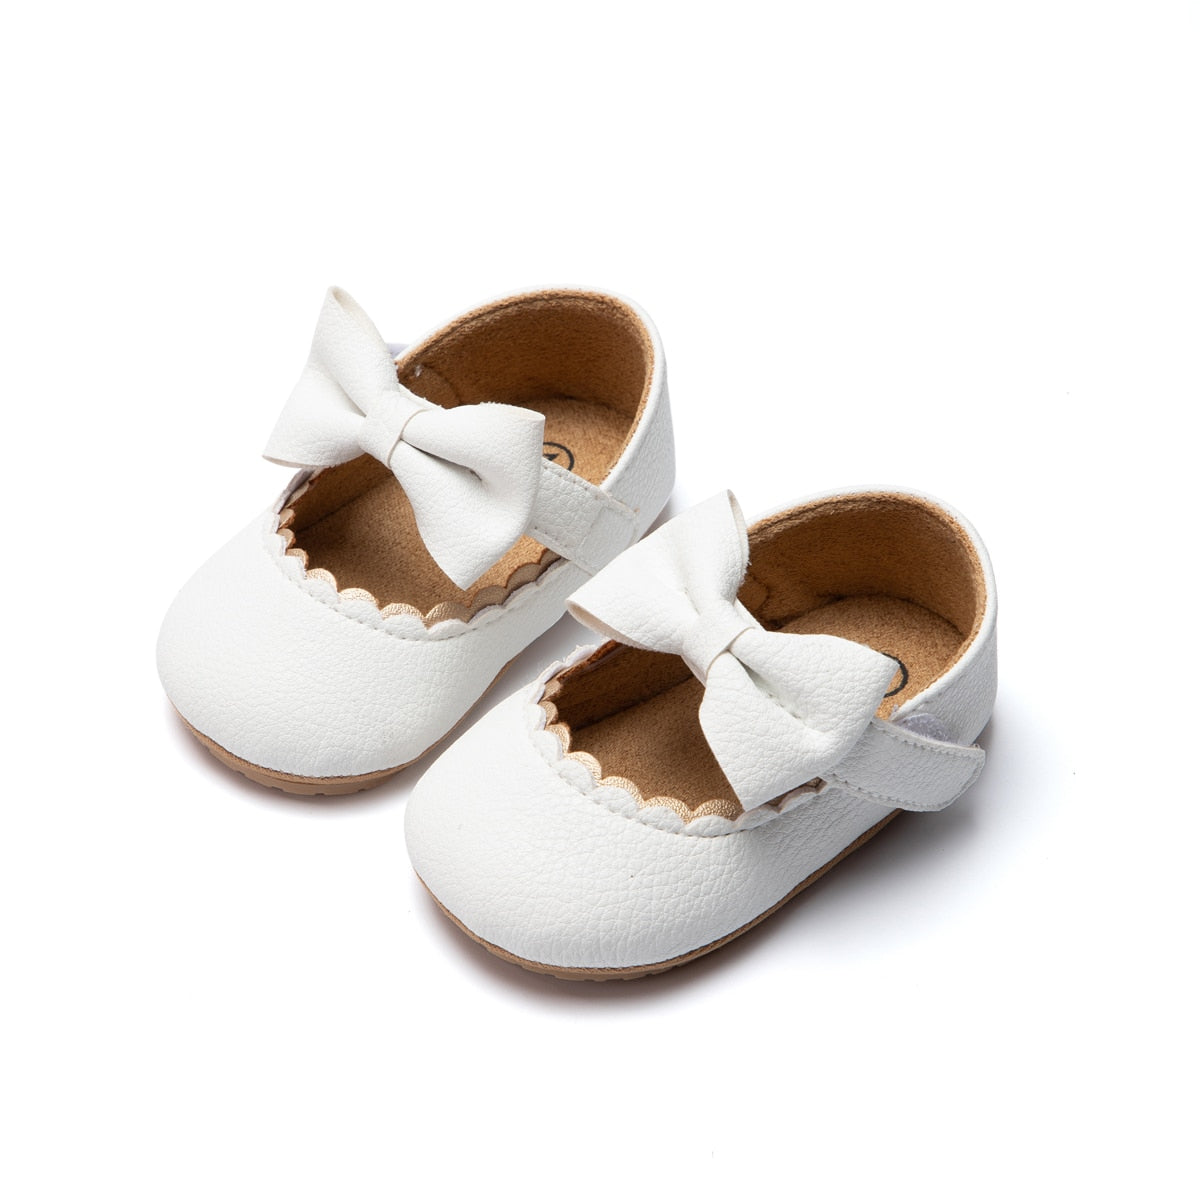 KIDSUN Baby Casual Shoes Infant Toddler Bowknot Non-slip Rubber Soft-Sole Flat PU First Walker Newborn Bow Decor Mary Janes - Rocket Family Shopping